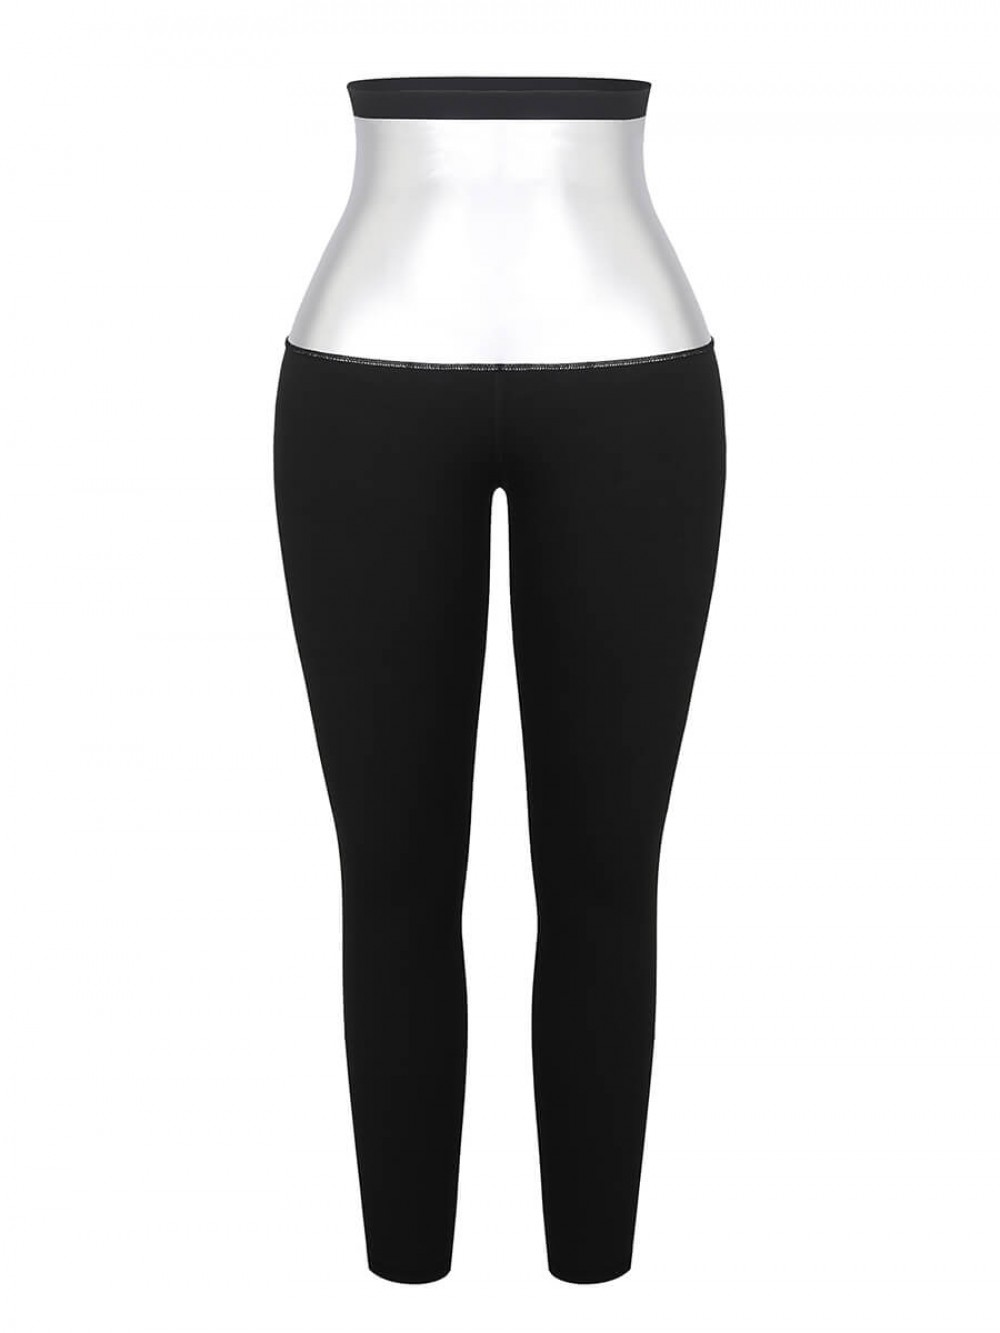 Black Silver Film Pants Fat Burning High Elasticity For Workout